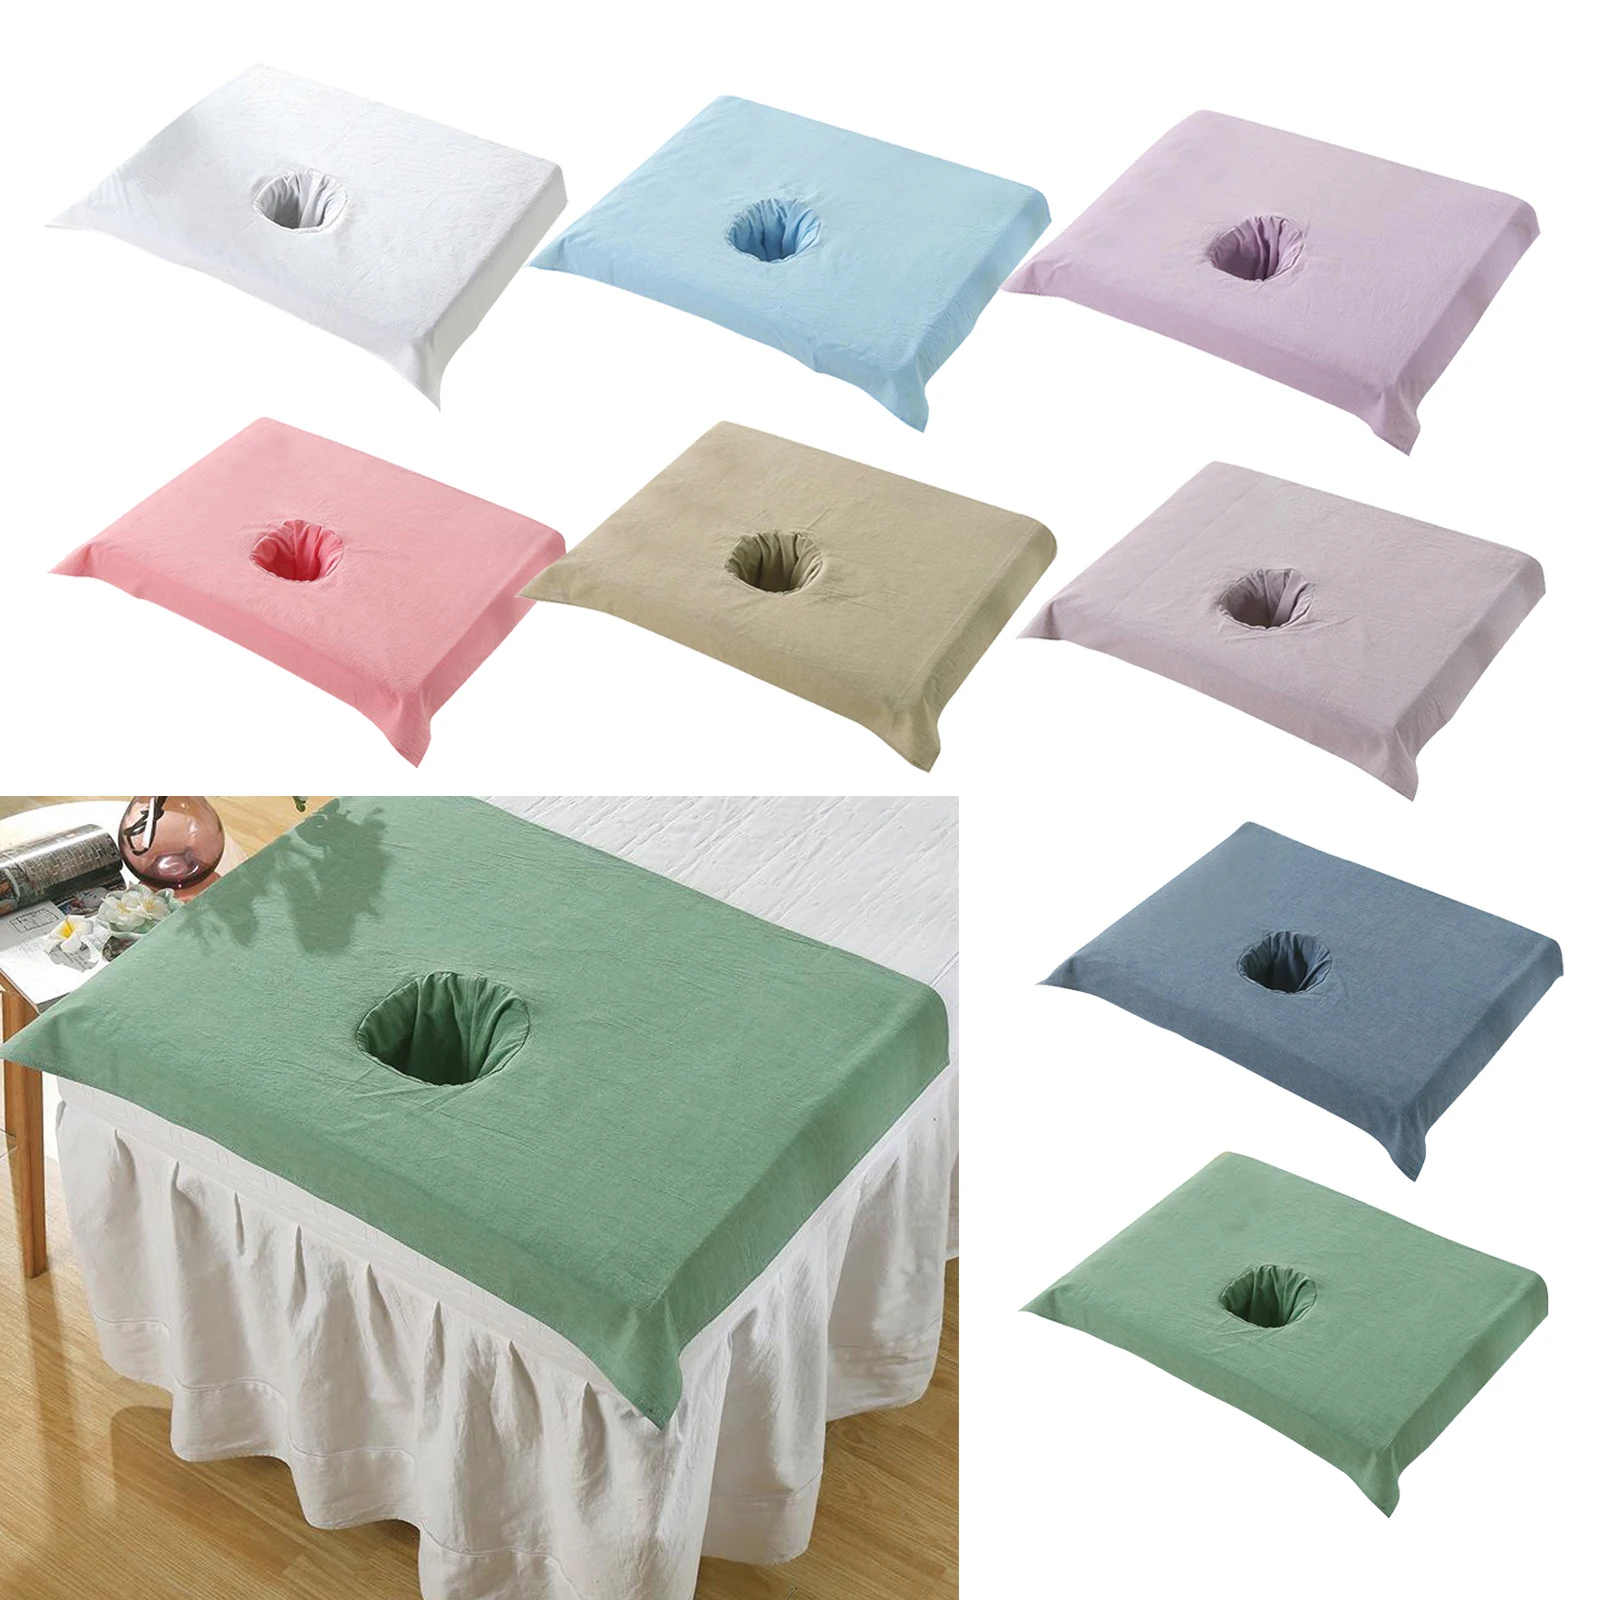 Face Breath Hole Cotton Durable Wash SPA Massage Table Sheets Bed Cover